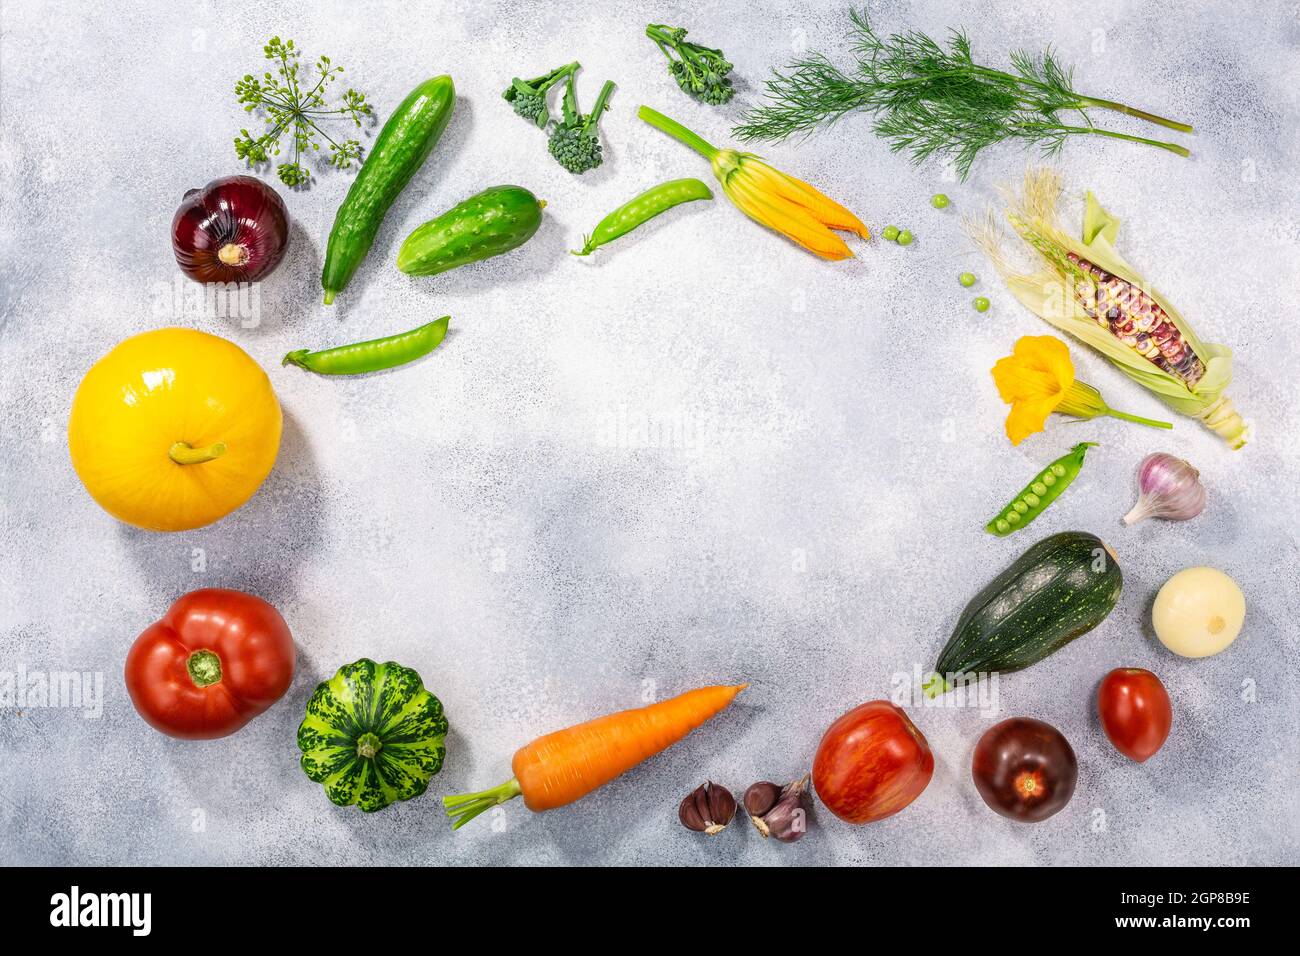 Fresh select seasonal vegetables on light textured backdrop, top view w/ copy space. Locavore movement, eat local, clean eating, farm fresh concept Stock Photo